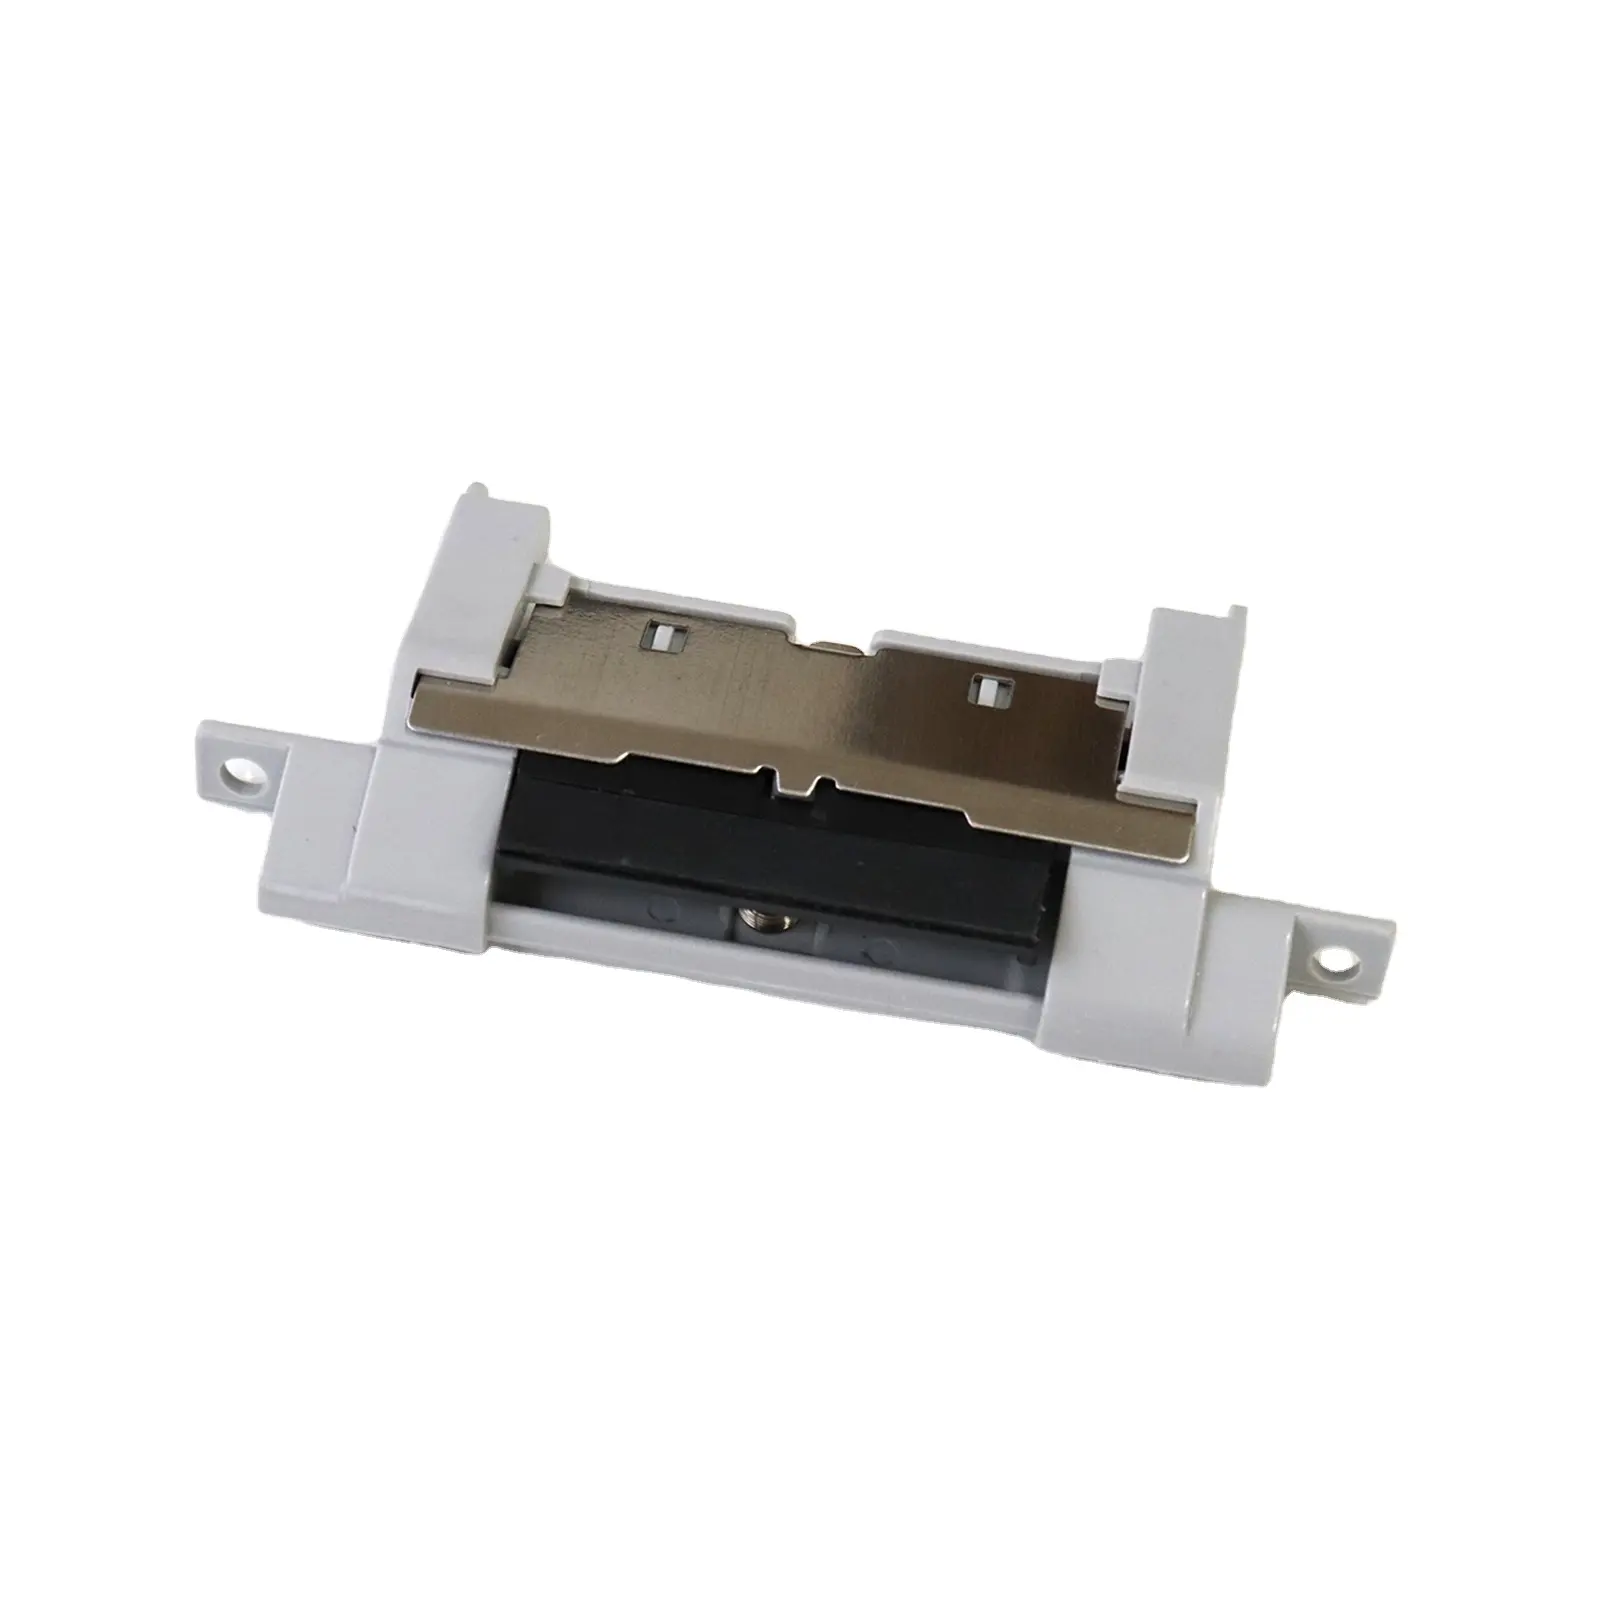 RM1-1298-000 Separation Pad For HP 1160 1320 hp P2015 2400 2420 5200 LBP3500